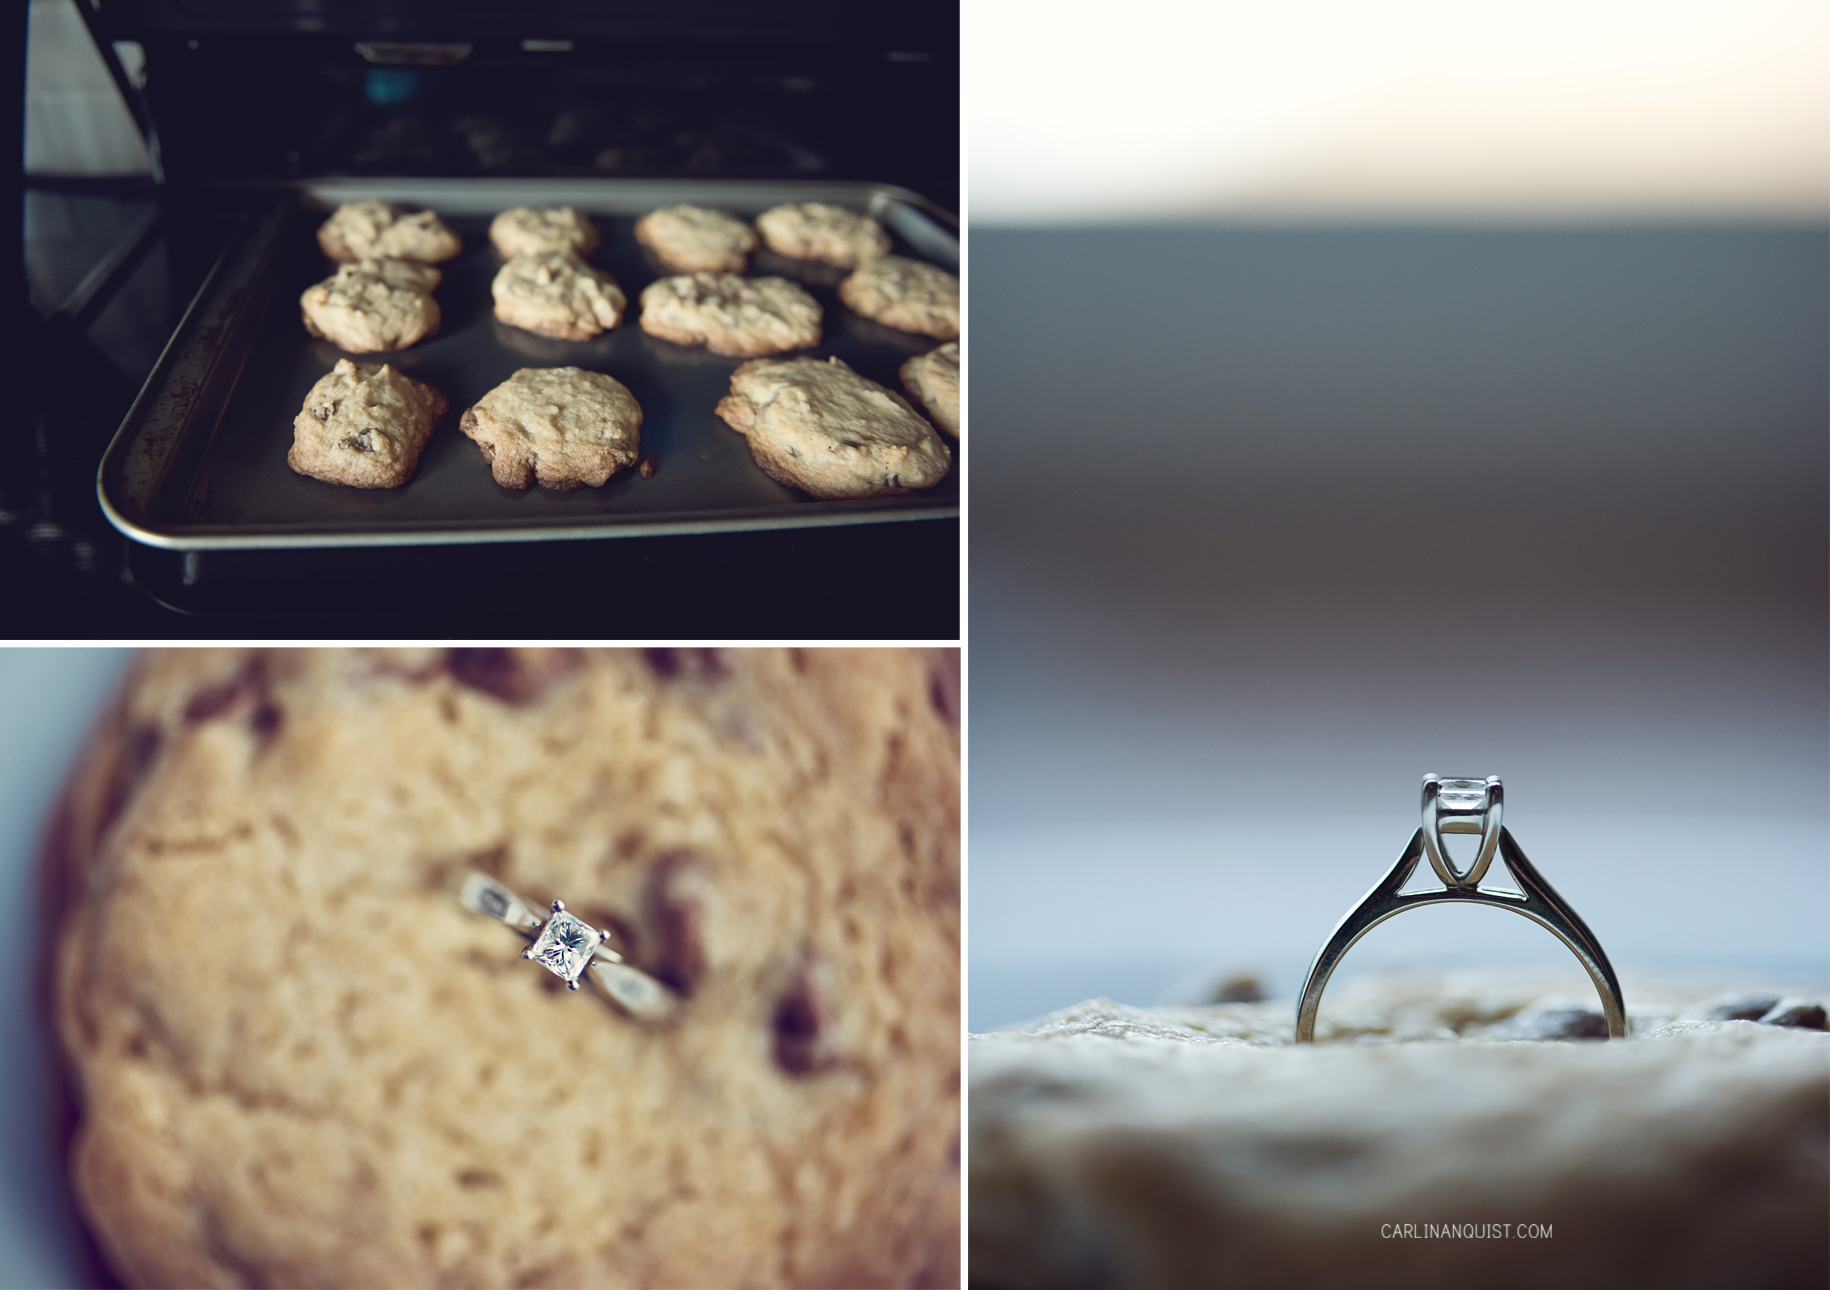 At-Home Baking Engagement Session | Calgary Wedding Photographers | Carlin Anquist Photography